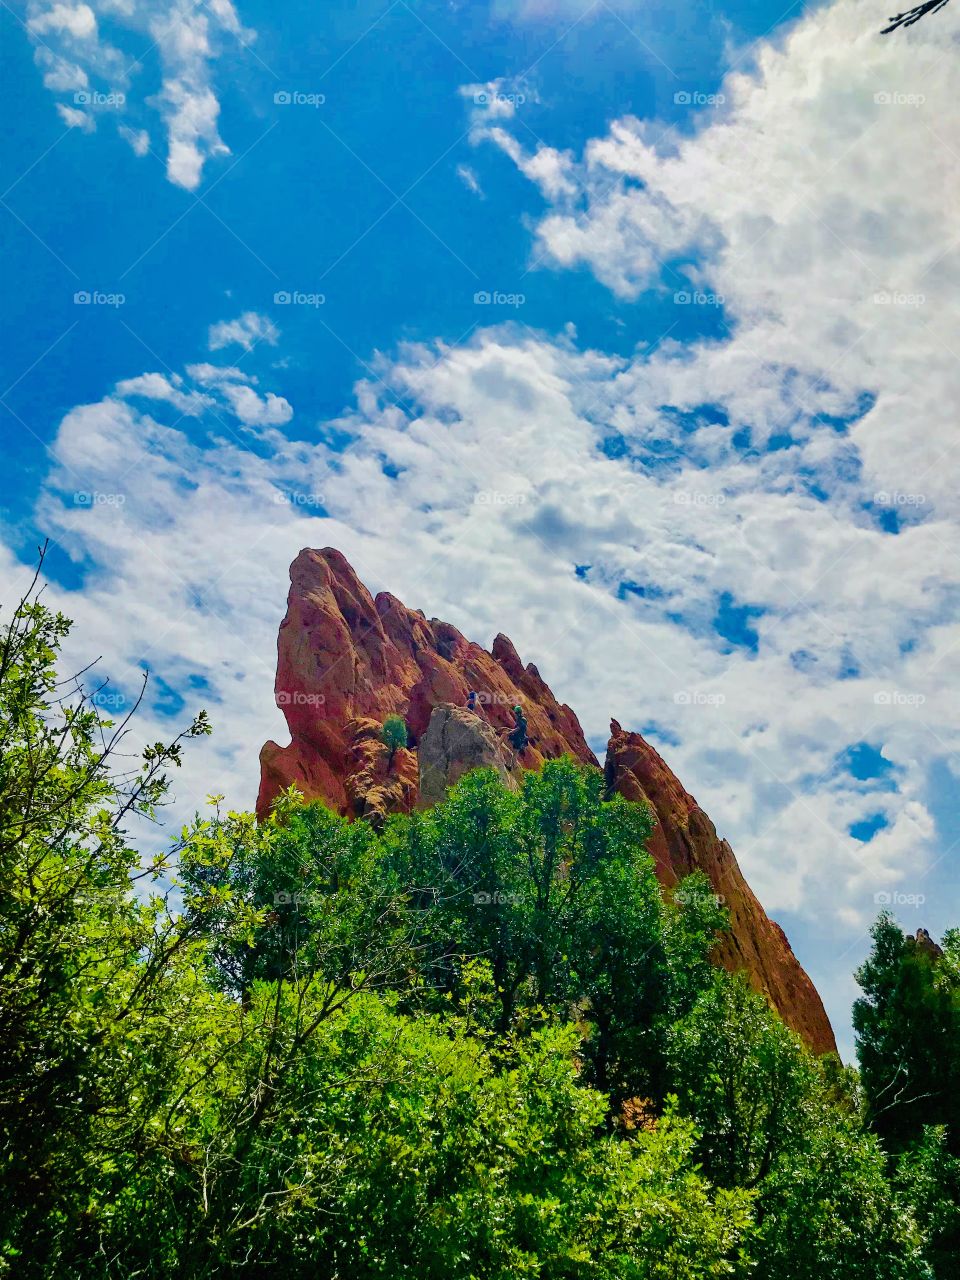 Rock climbers on top of a rock formation at Garden of the Gods. There are beautiful spots throughout the park for a climb